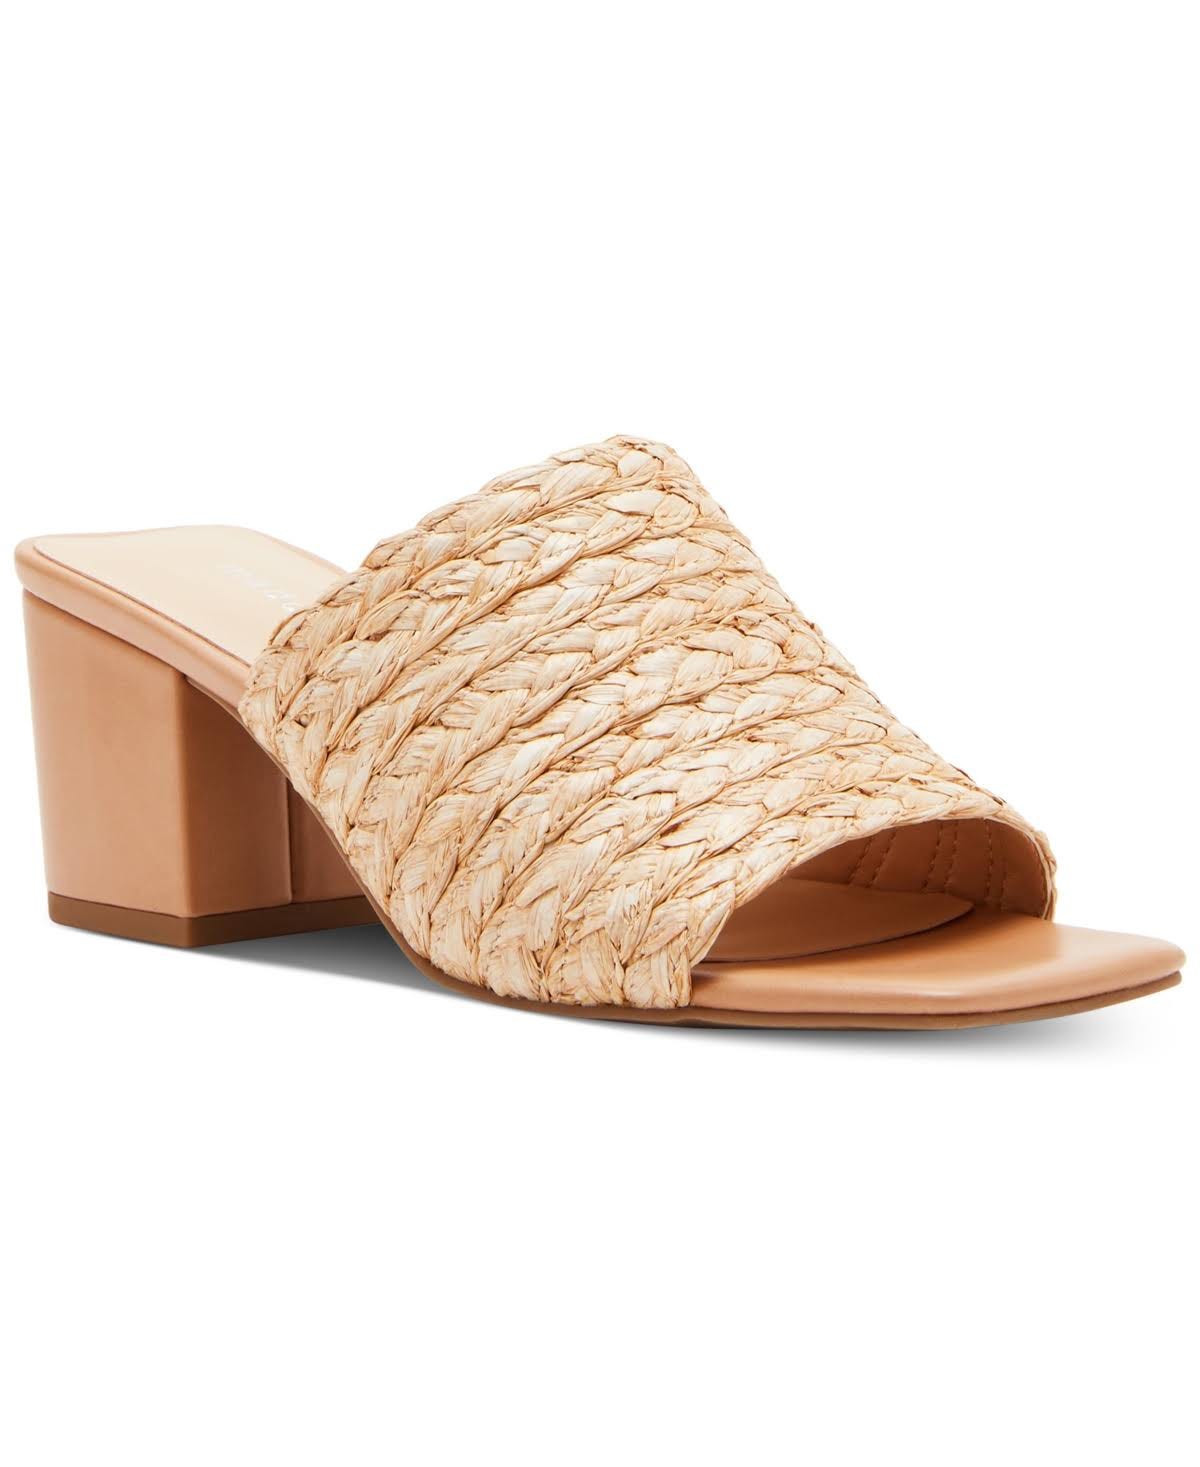 Madden Girl Taz: Stylish Natural Raffia Women's Sandals with Block Heels and Braided Slip-On Design | Image